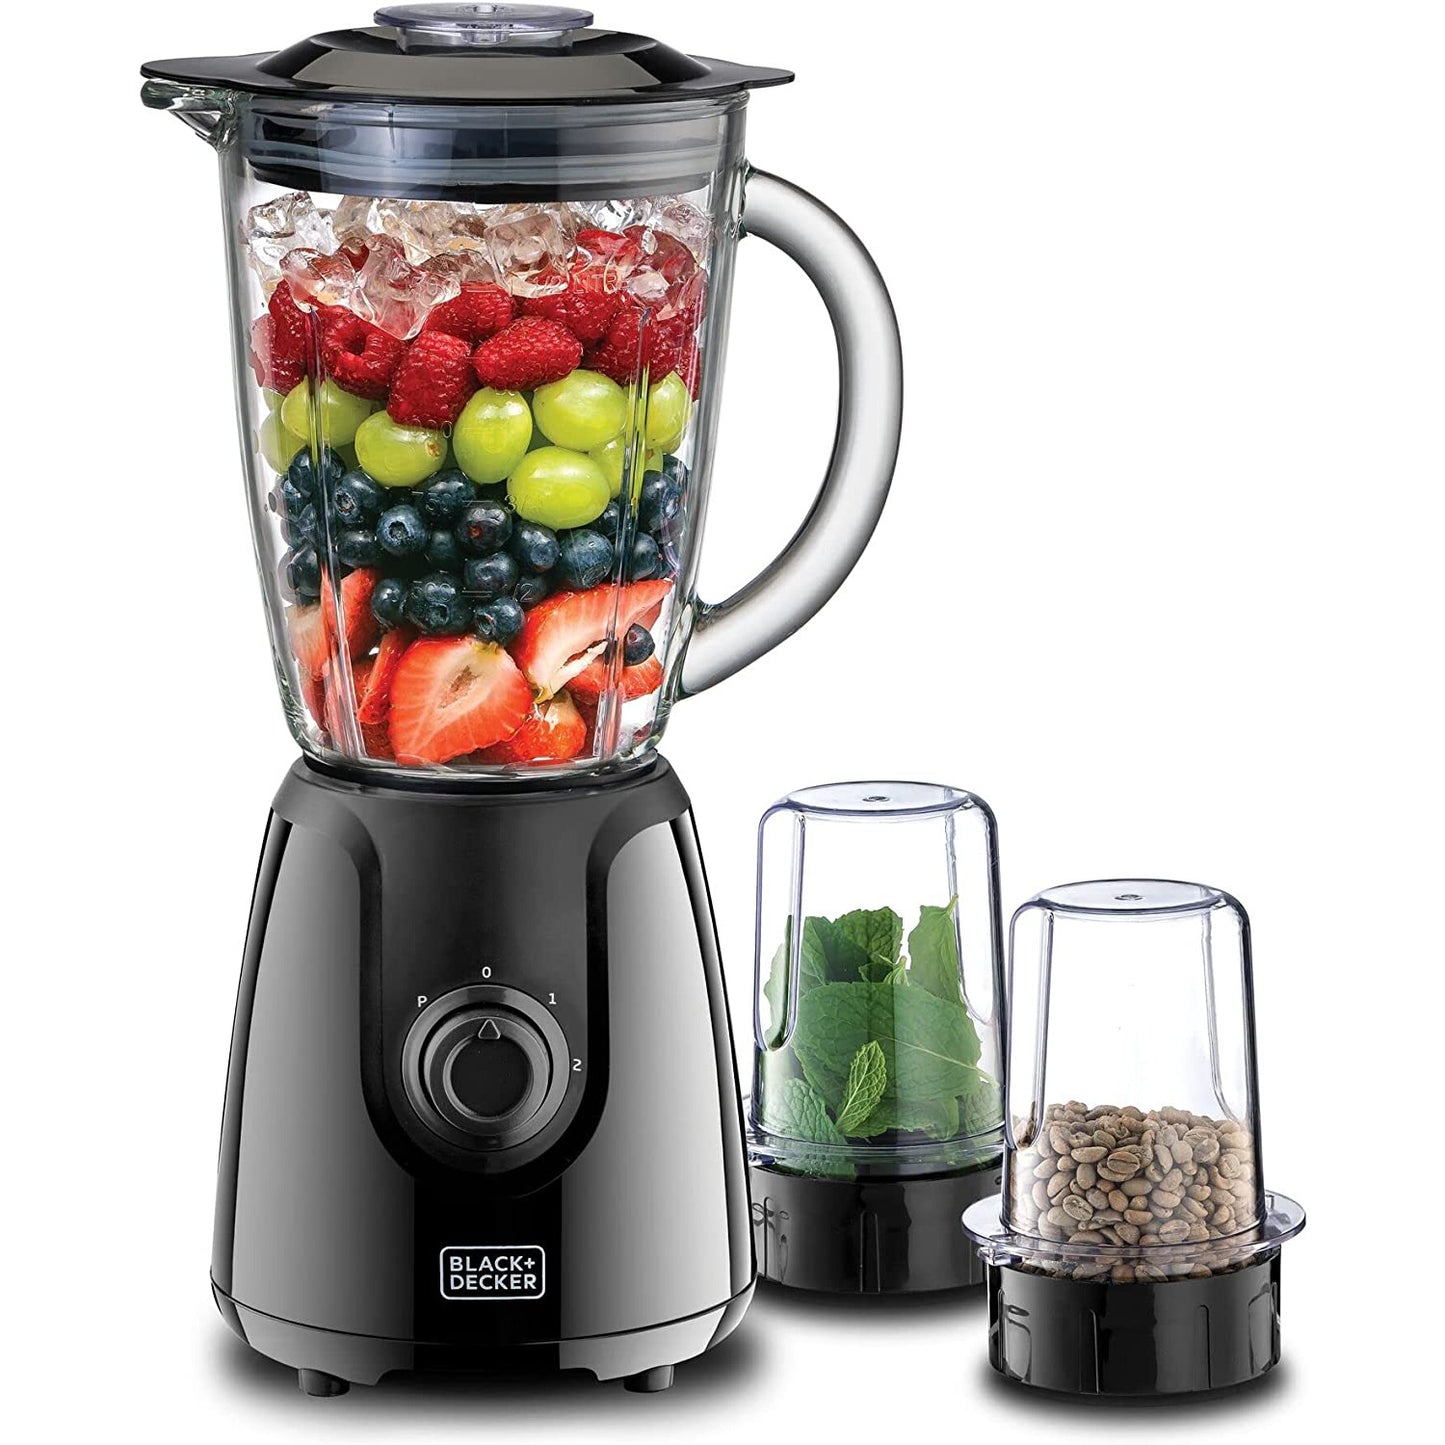 BLACK+DECKER BLENDER WITH GLASS JAR AND 2 GRINDING MILL